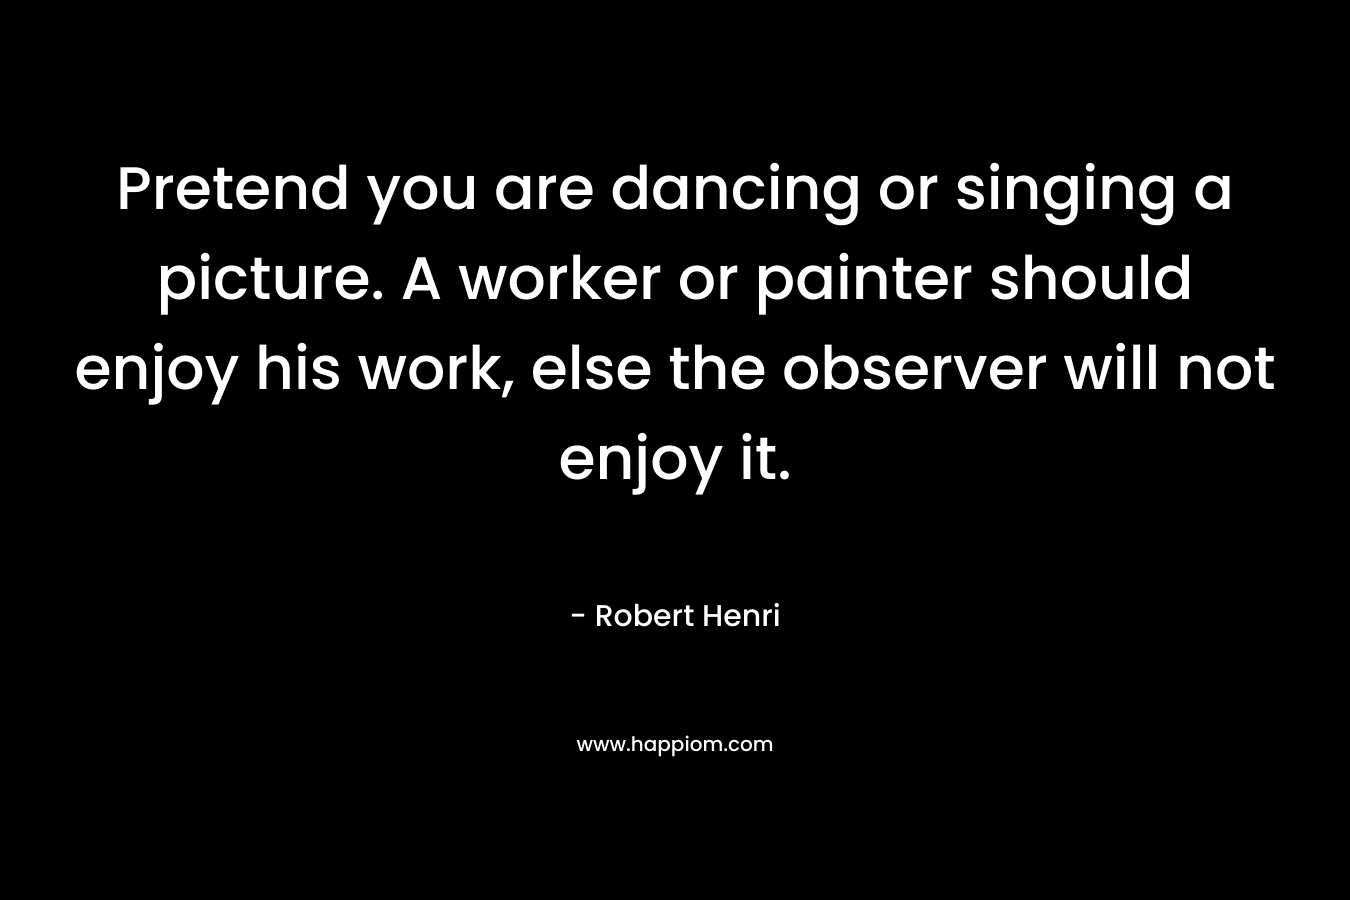 Pretend you are dancing or singing a picture. A worker or painter should enjoy his work, else the observer will not enjoy it.